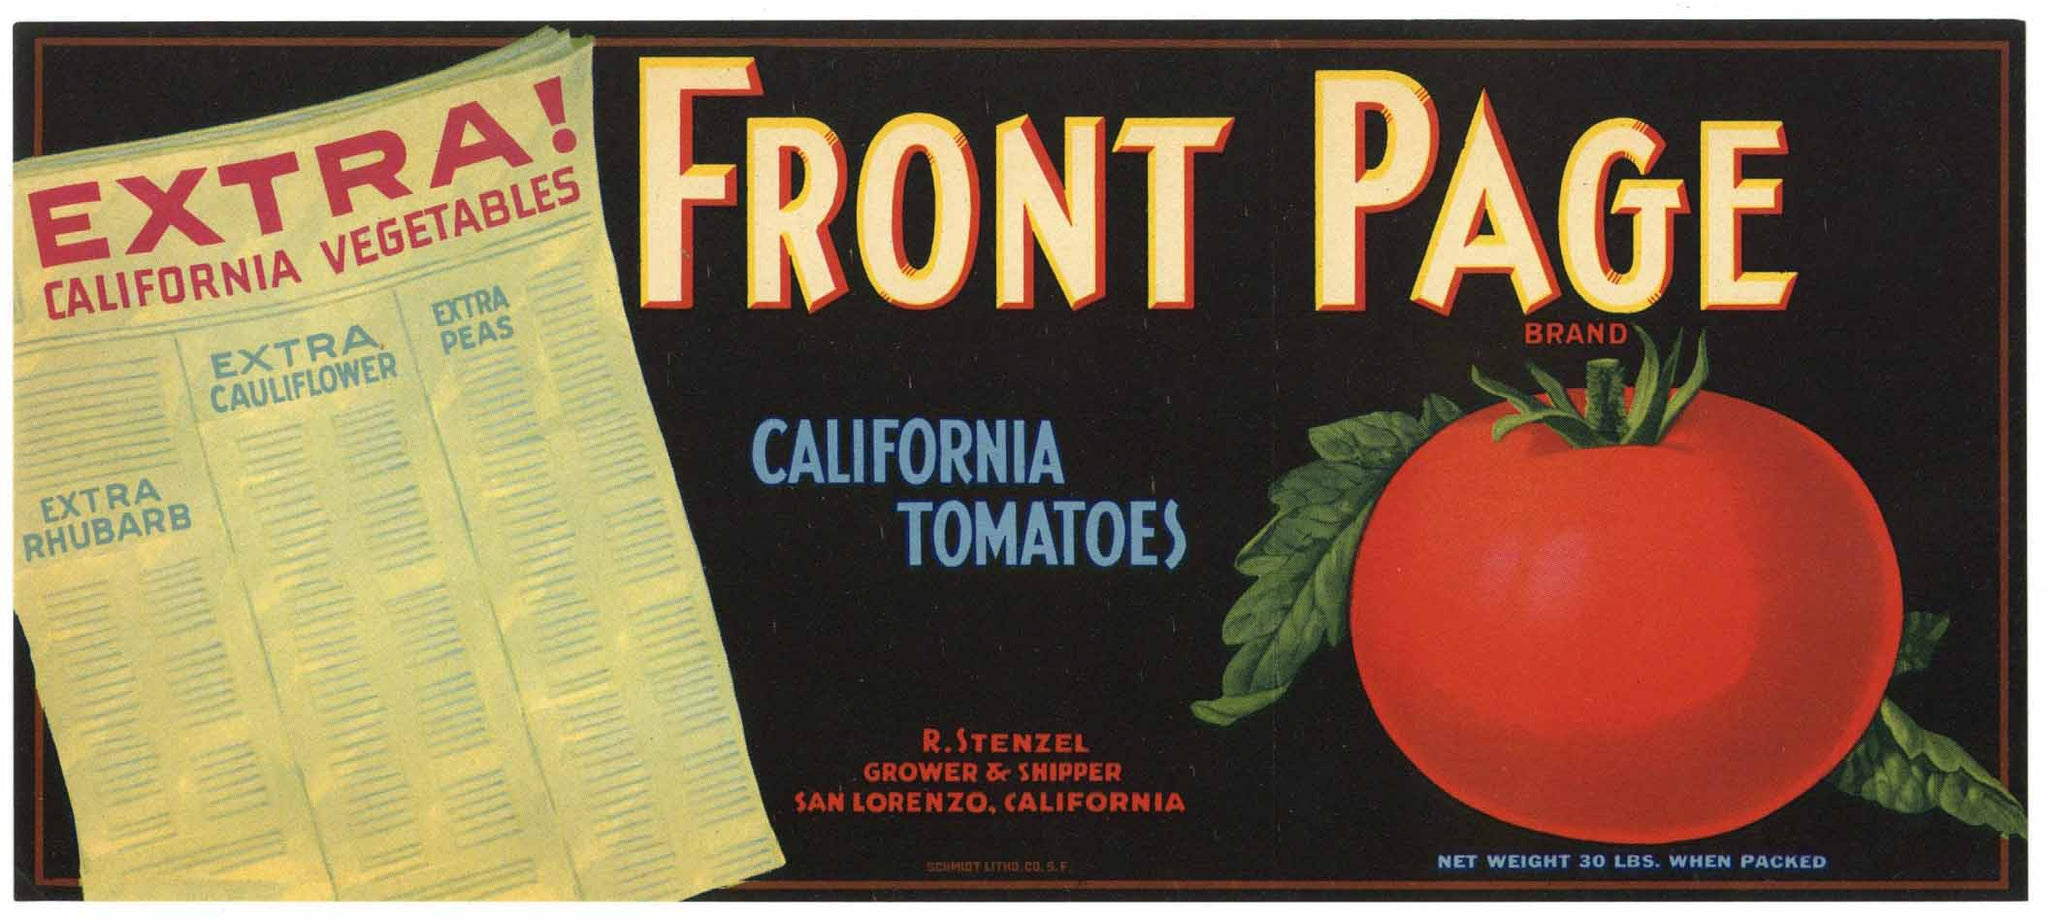 Front Page Brand Vintage San Lorenzo Tomato Crate Label